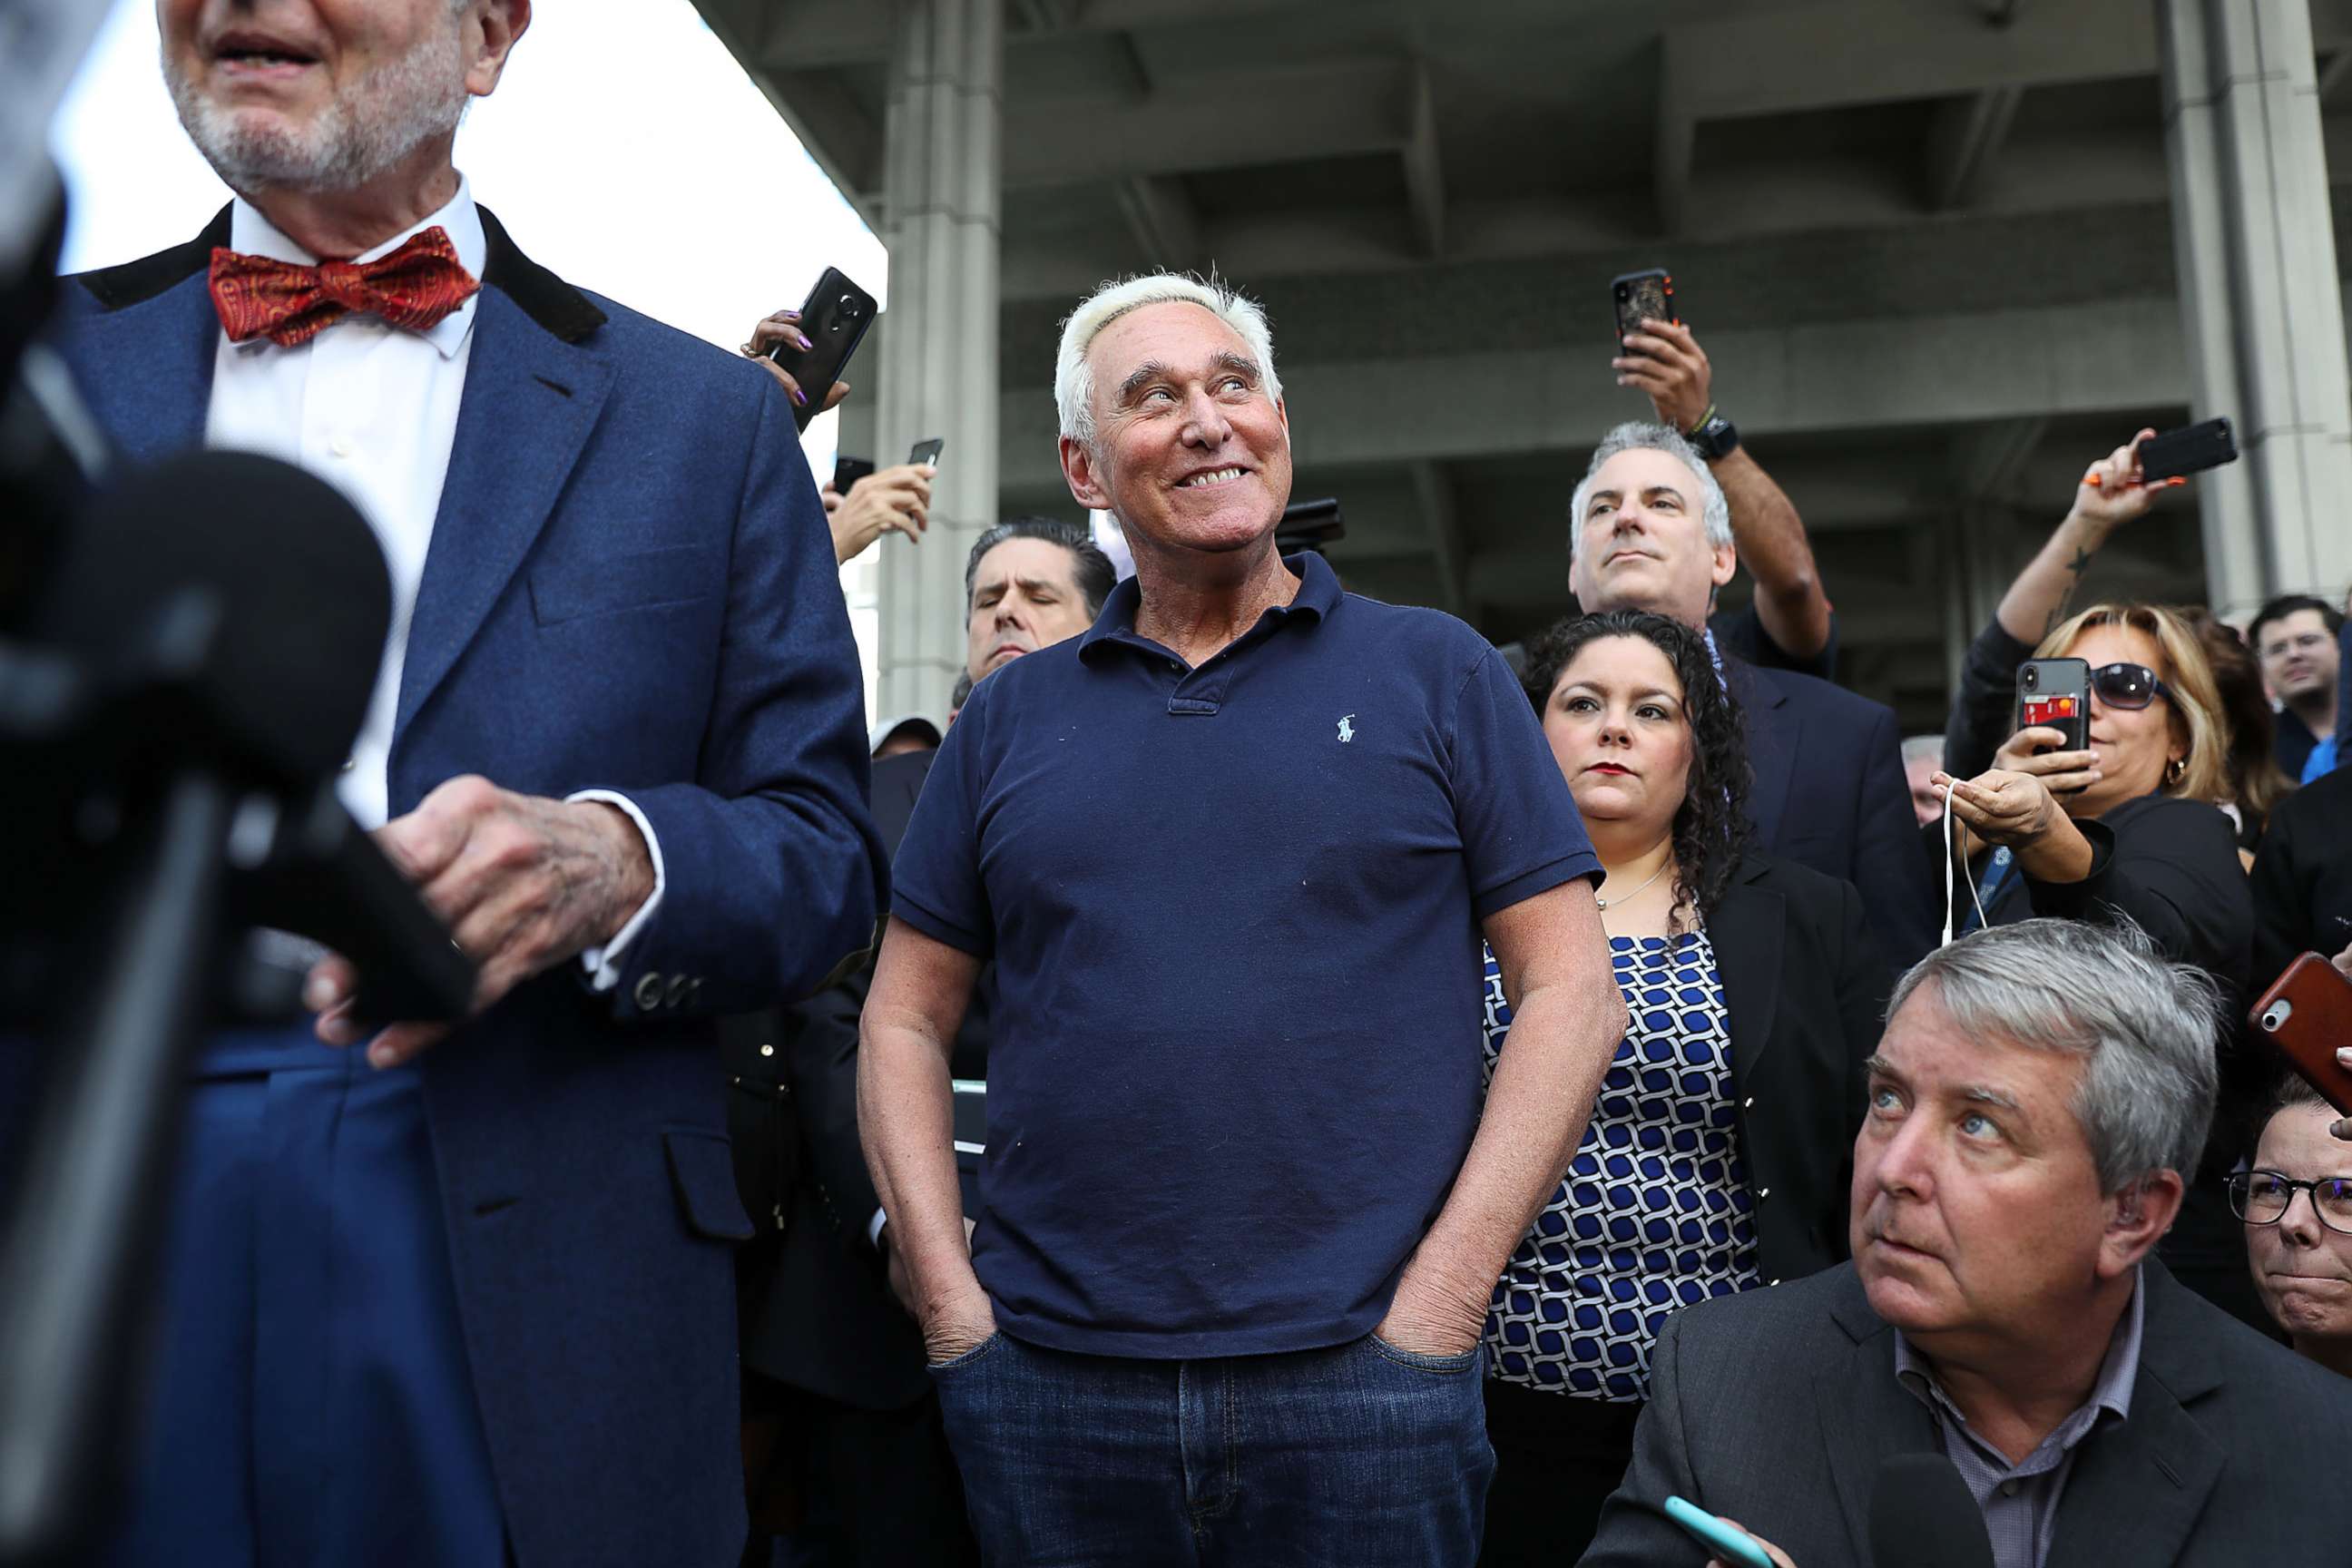 PHOTO: Roger Stone, a former advisor to President Donald Trump, waits to speak to the media after exiting the Federal Courthouse, Jan. 25, 2019 in Fort Lauderdale, Fla.